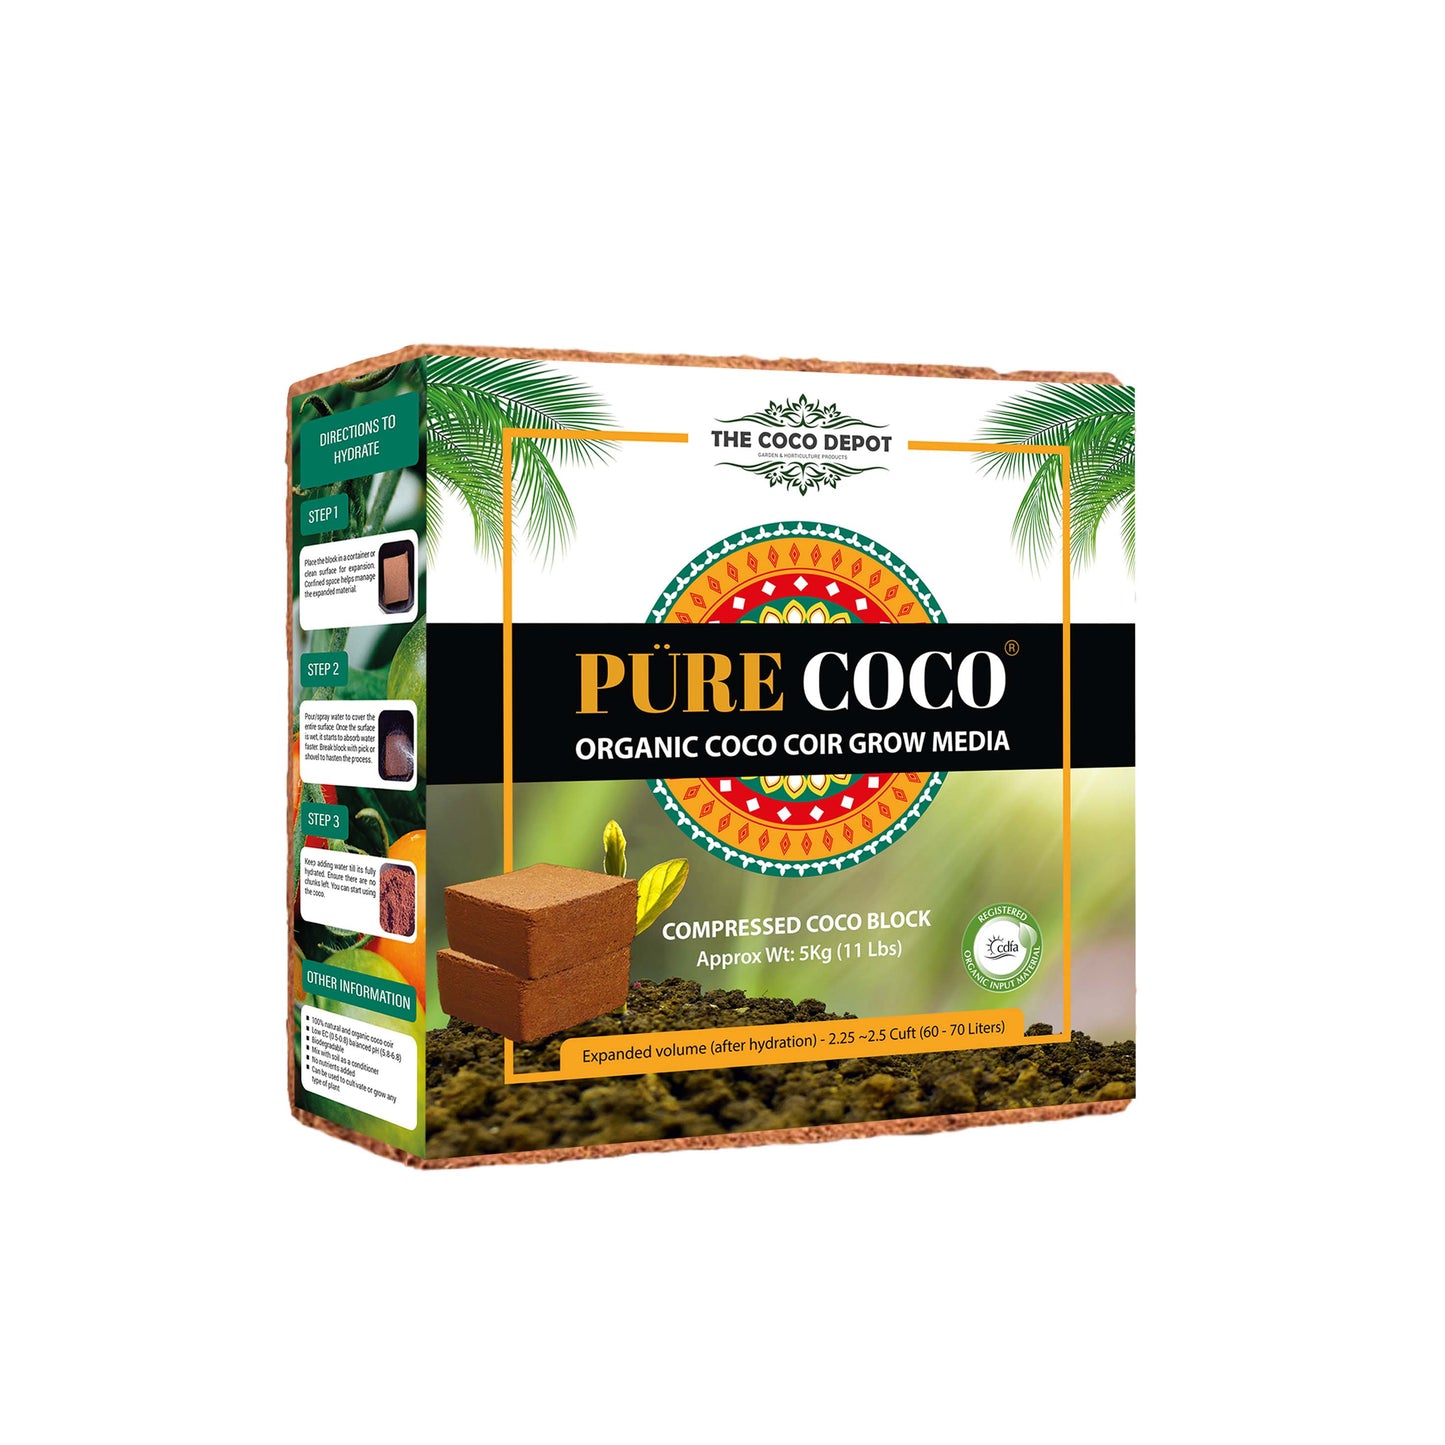 Pure Coco® Organic Coco Coir compressed 11lbs block Individually packaged